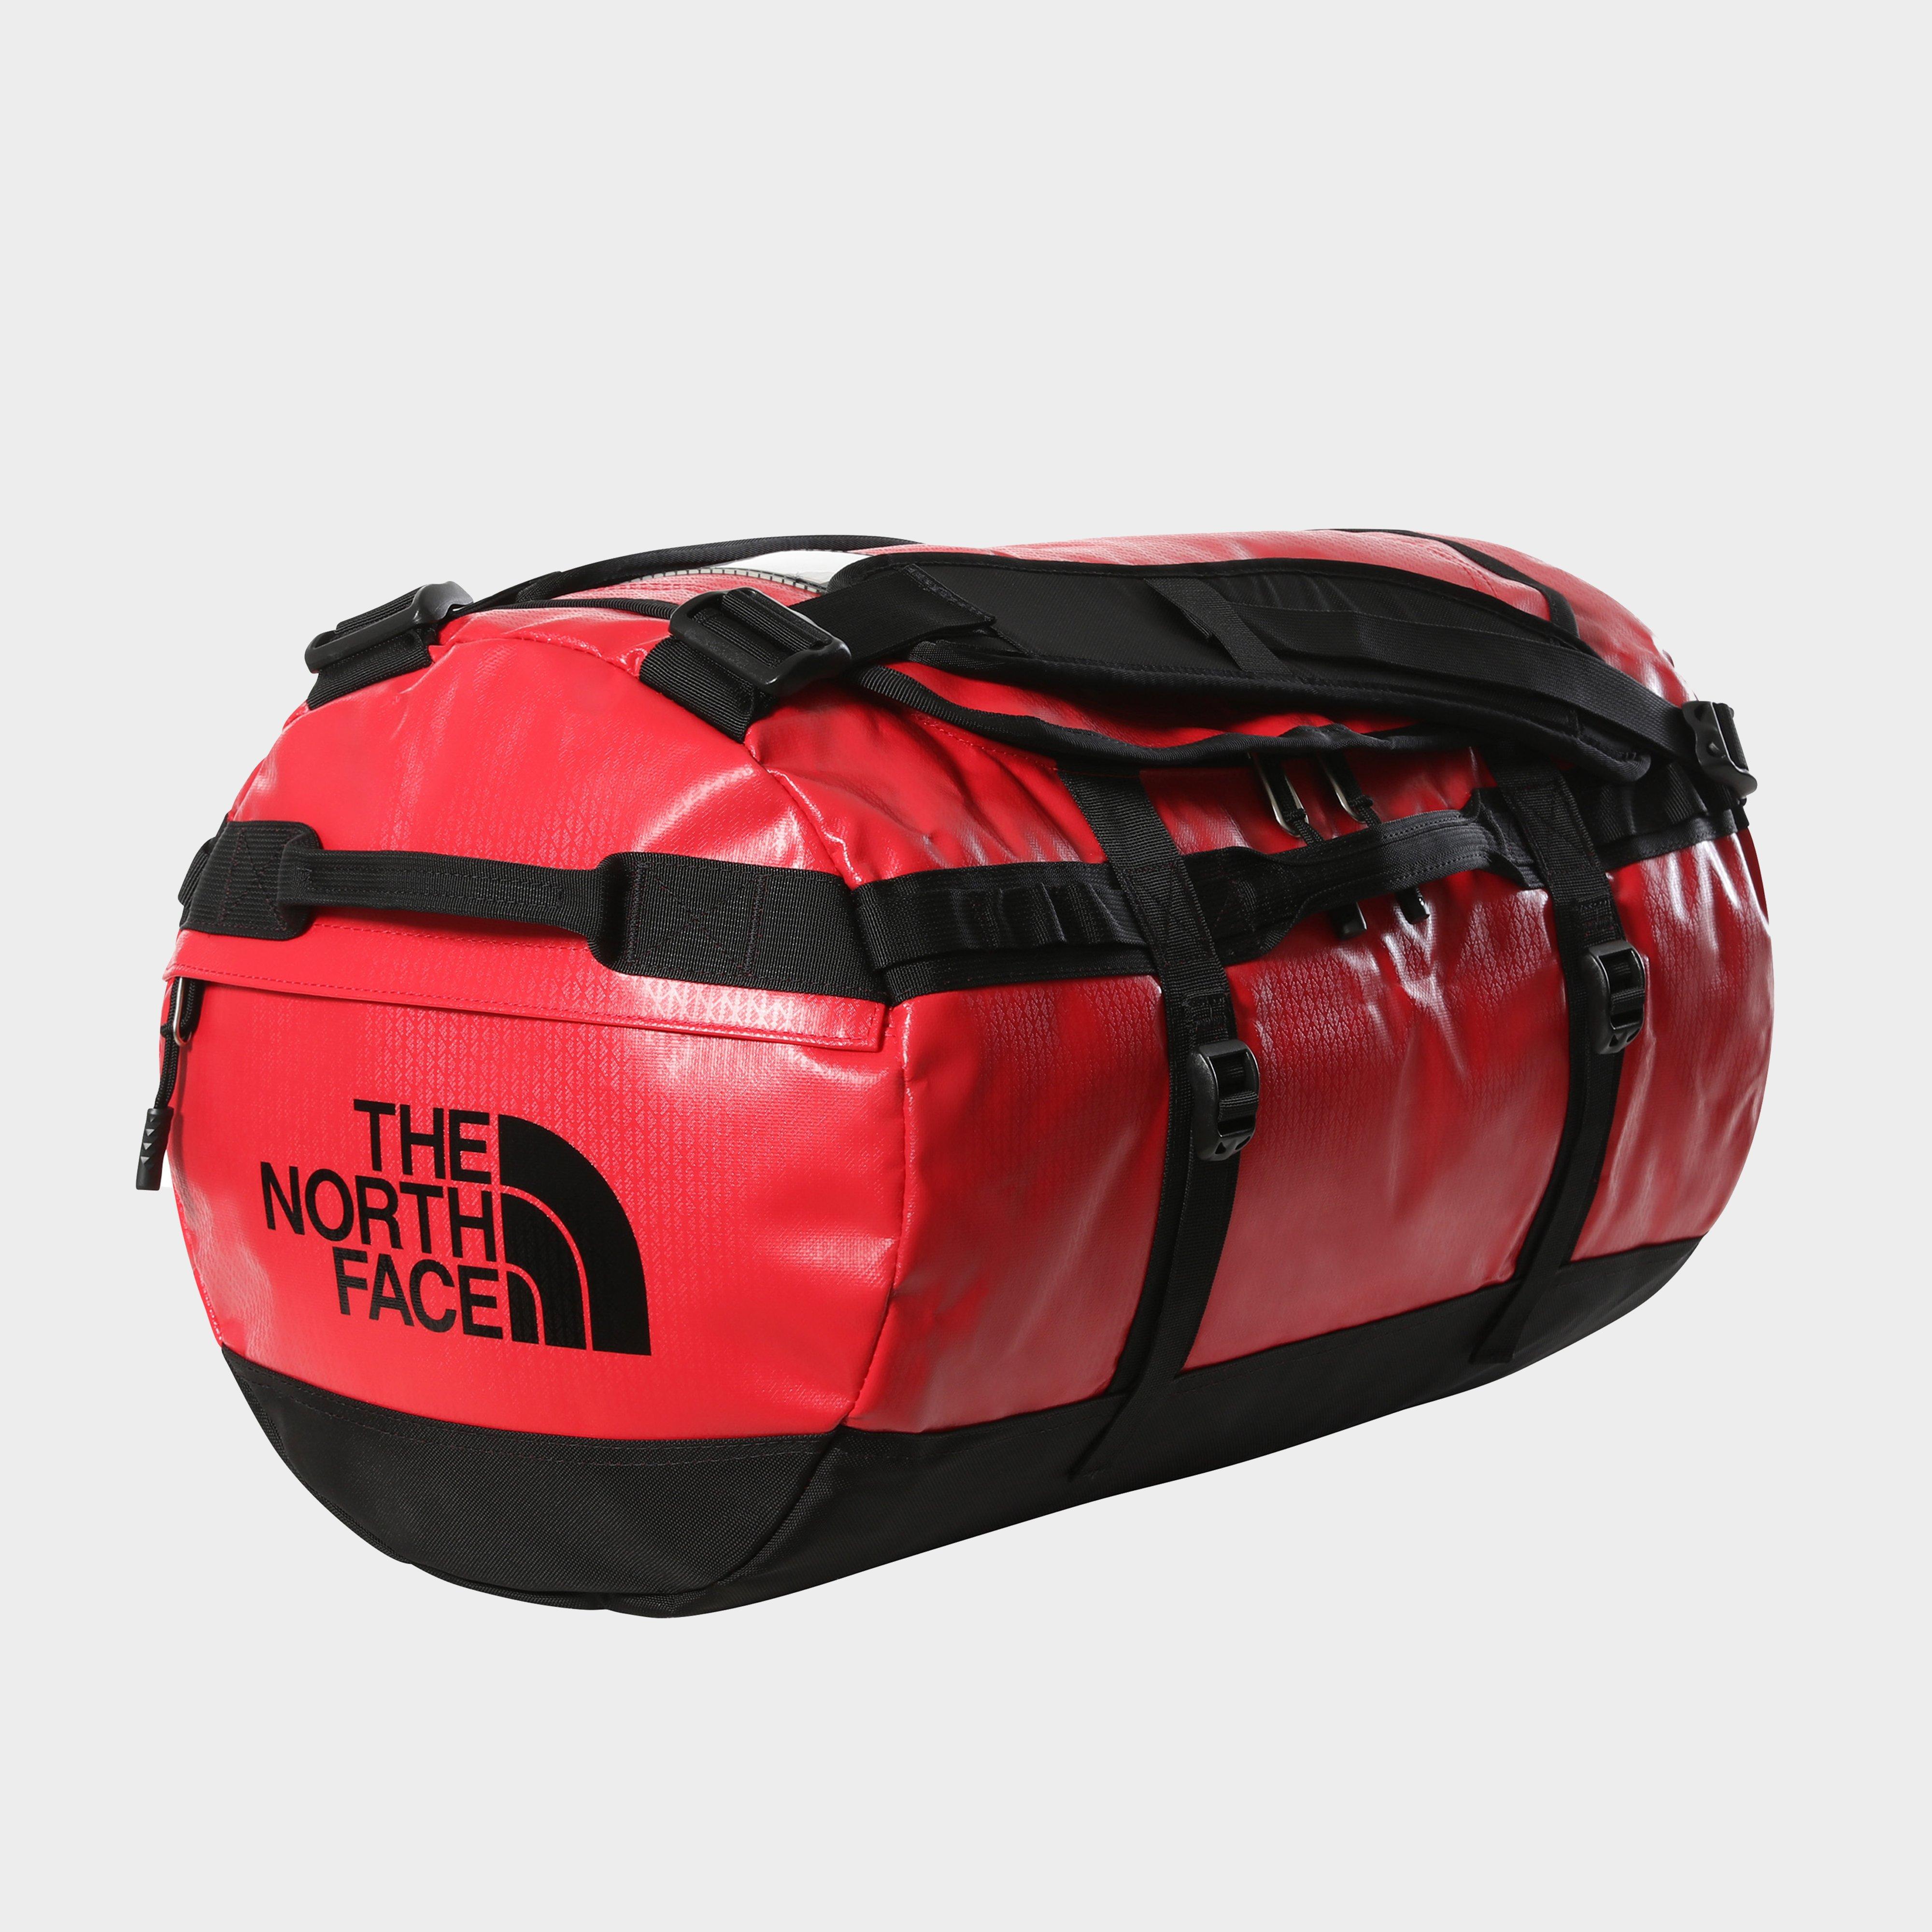 The North Face The North Face Base Camp Duffel Bag (Small) - Red, Red